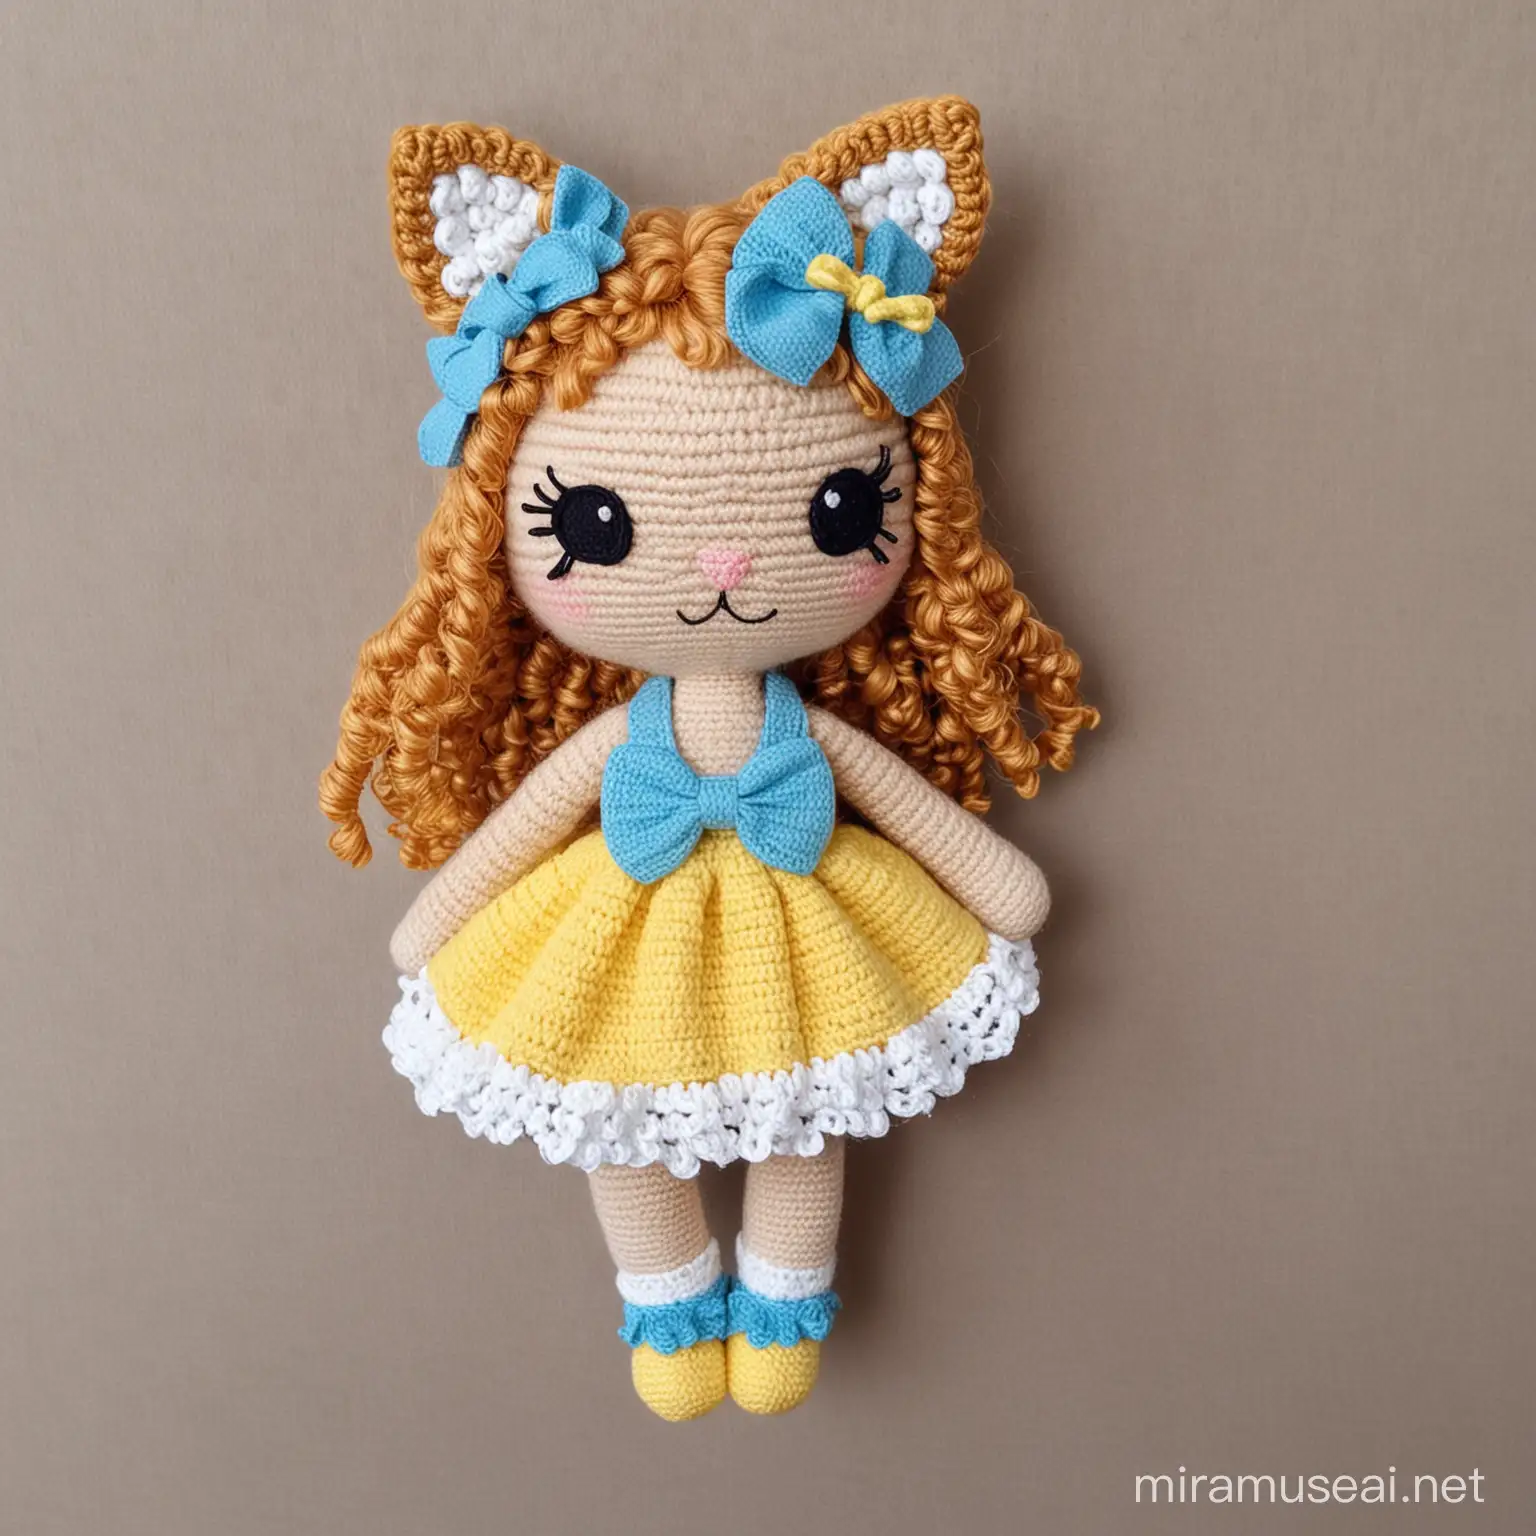 Amigurumi Crochet Adorable CatThemed Baby Girl with Boho Chic Outfit